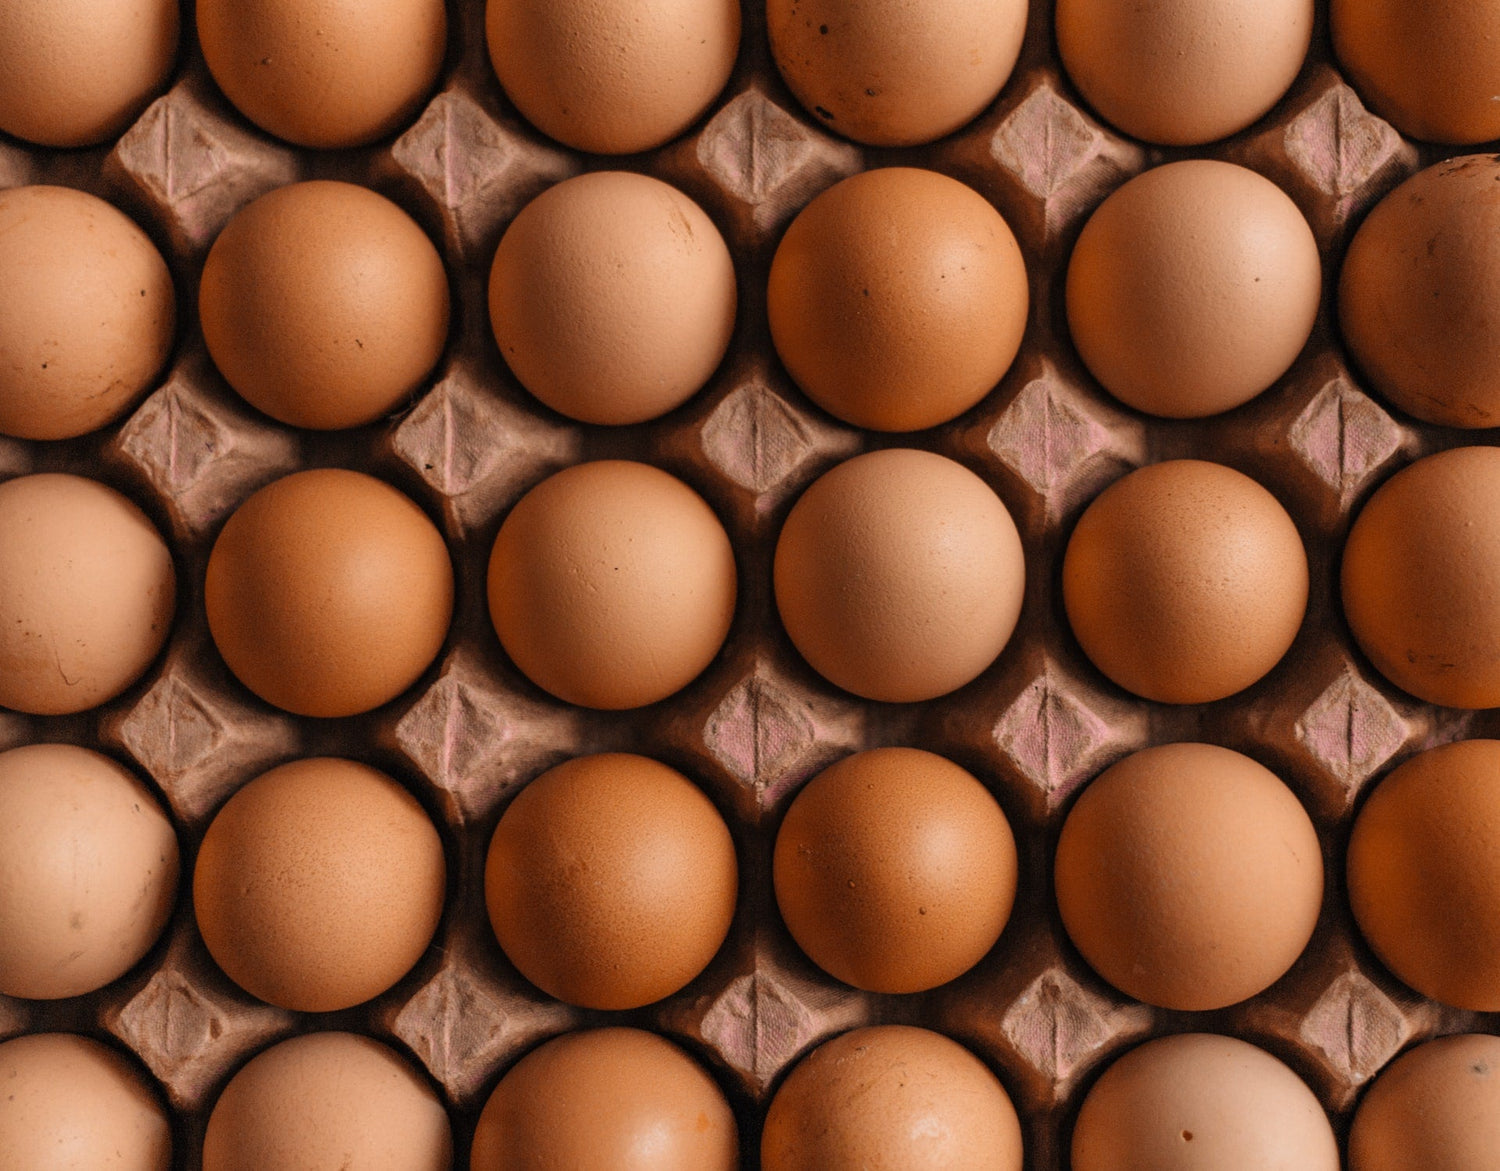 It's a picture of at least thirty brown eggs.